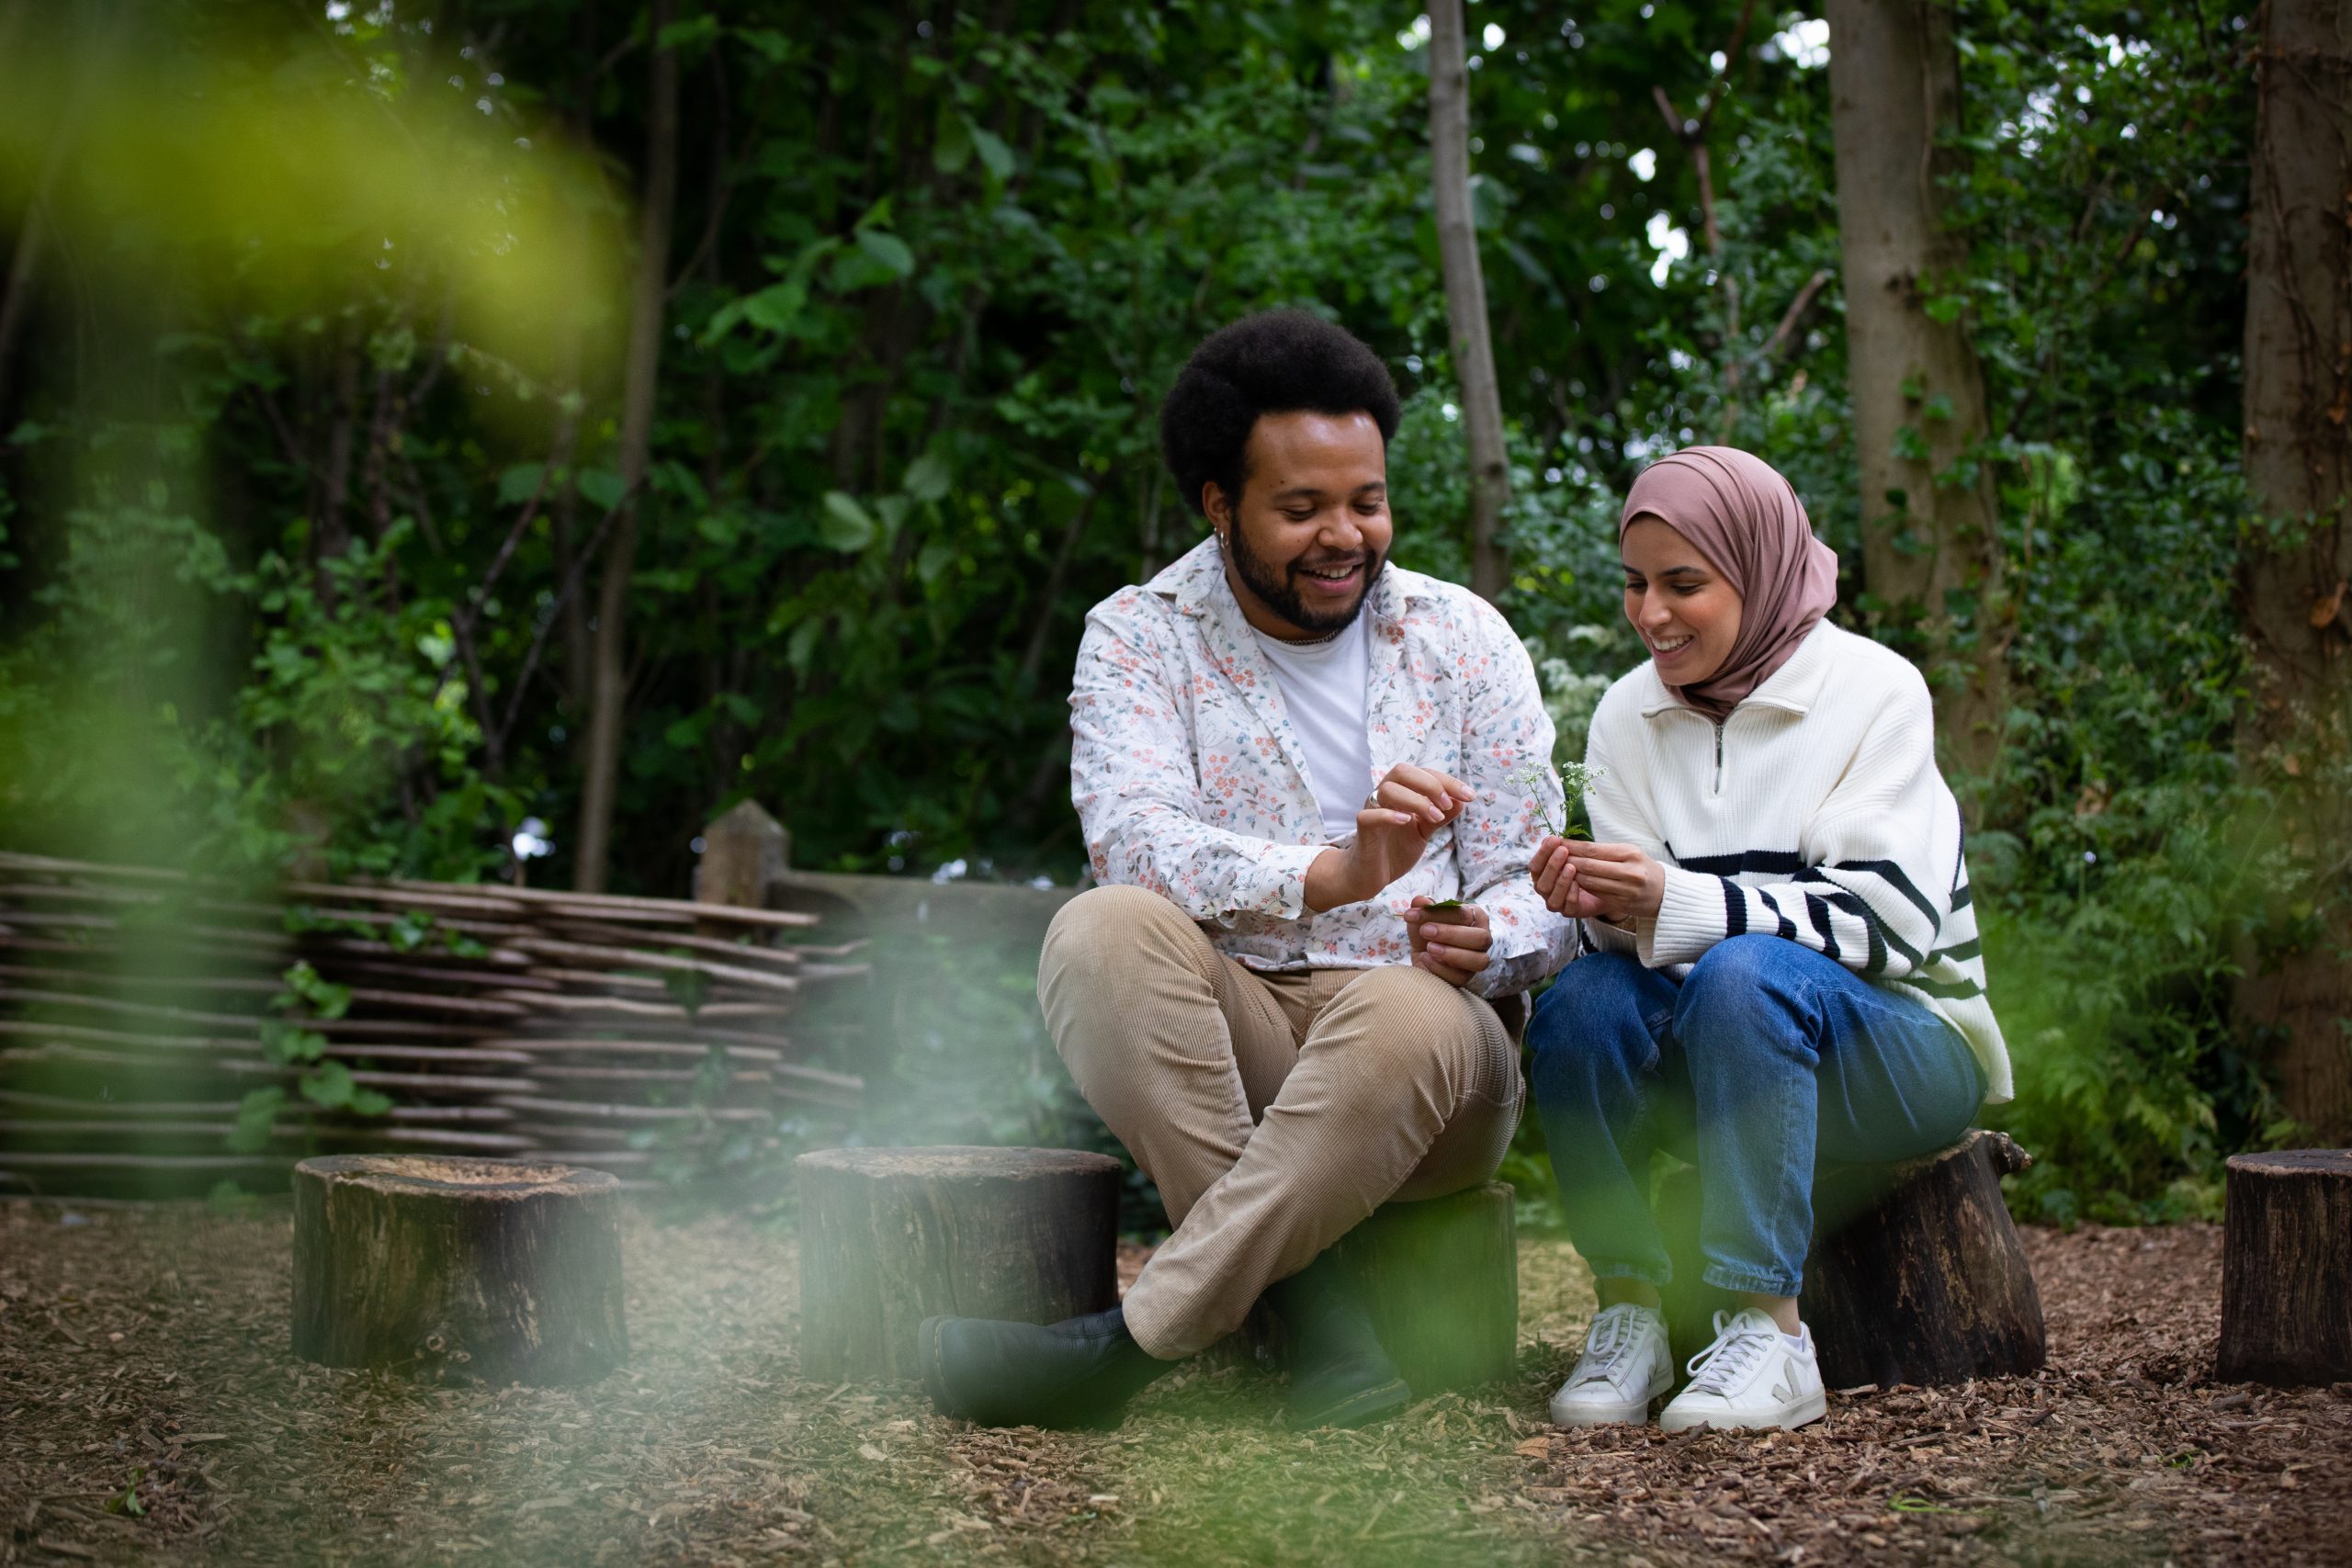 an image of two people sitting on a bench in a wooded area looking at small plants.